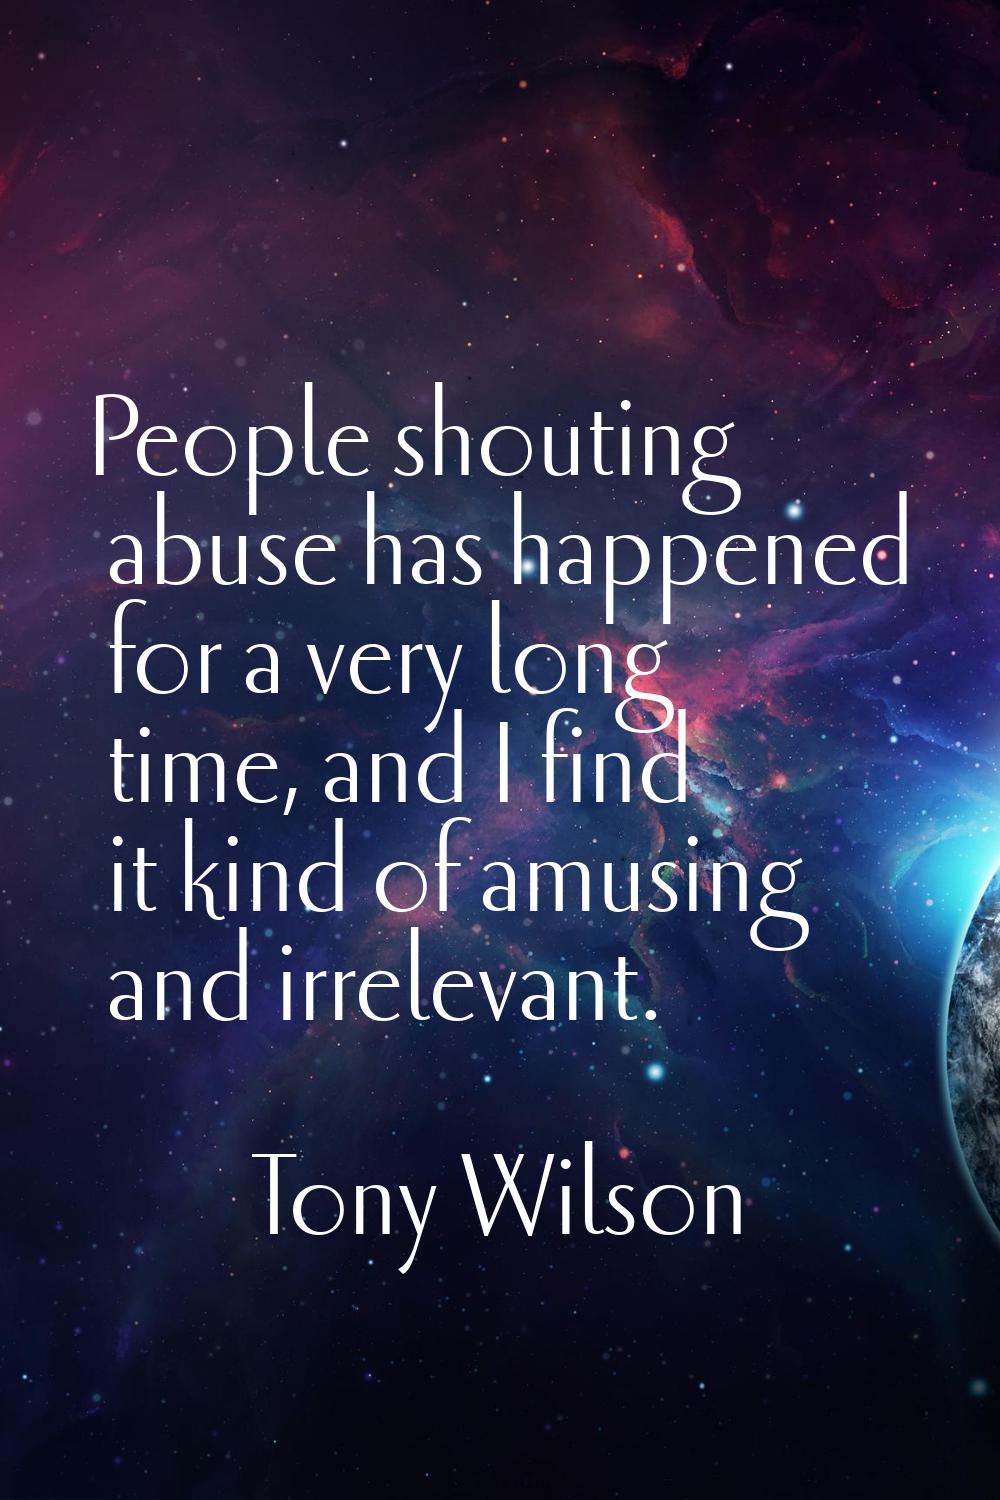 People shouting abuse has happened for a very long time, and I find it kind of amusing and irreleva